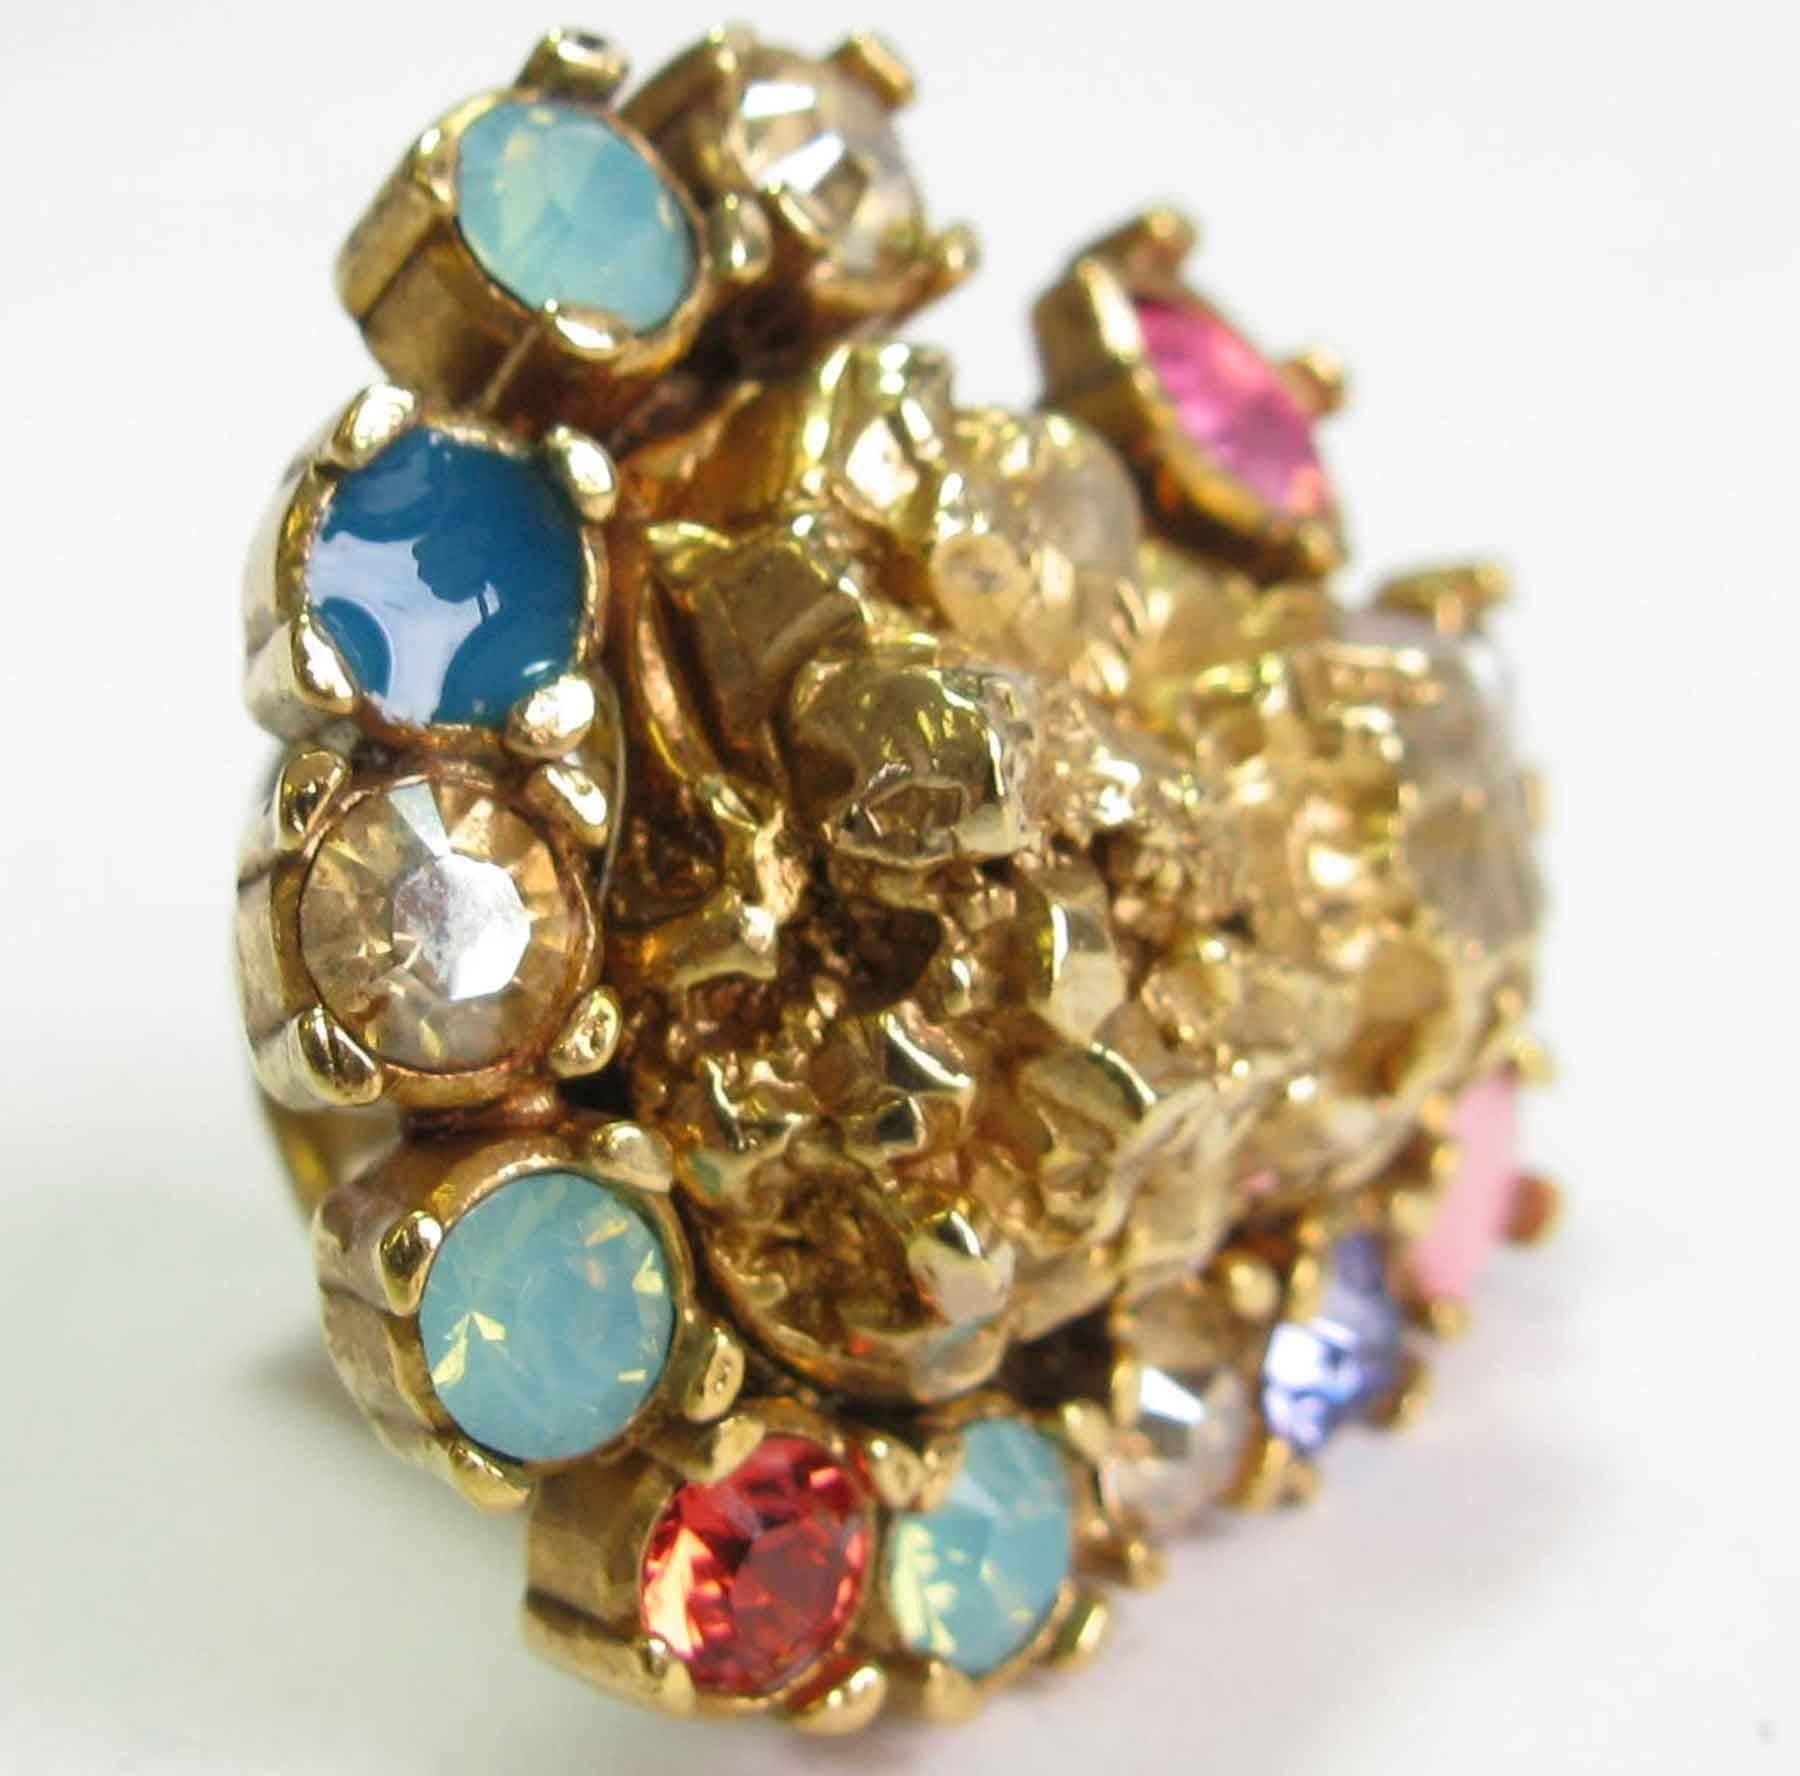 YVES SAINT LAURENT Heart Ring in Gilded Metal and Multicolored Rhinestones S49EU 3